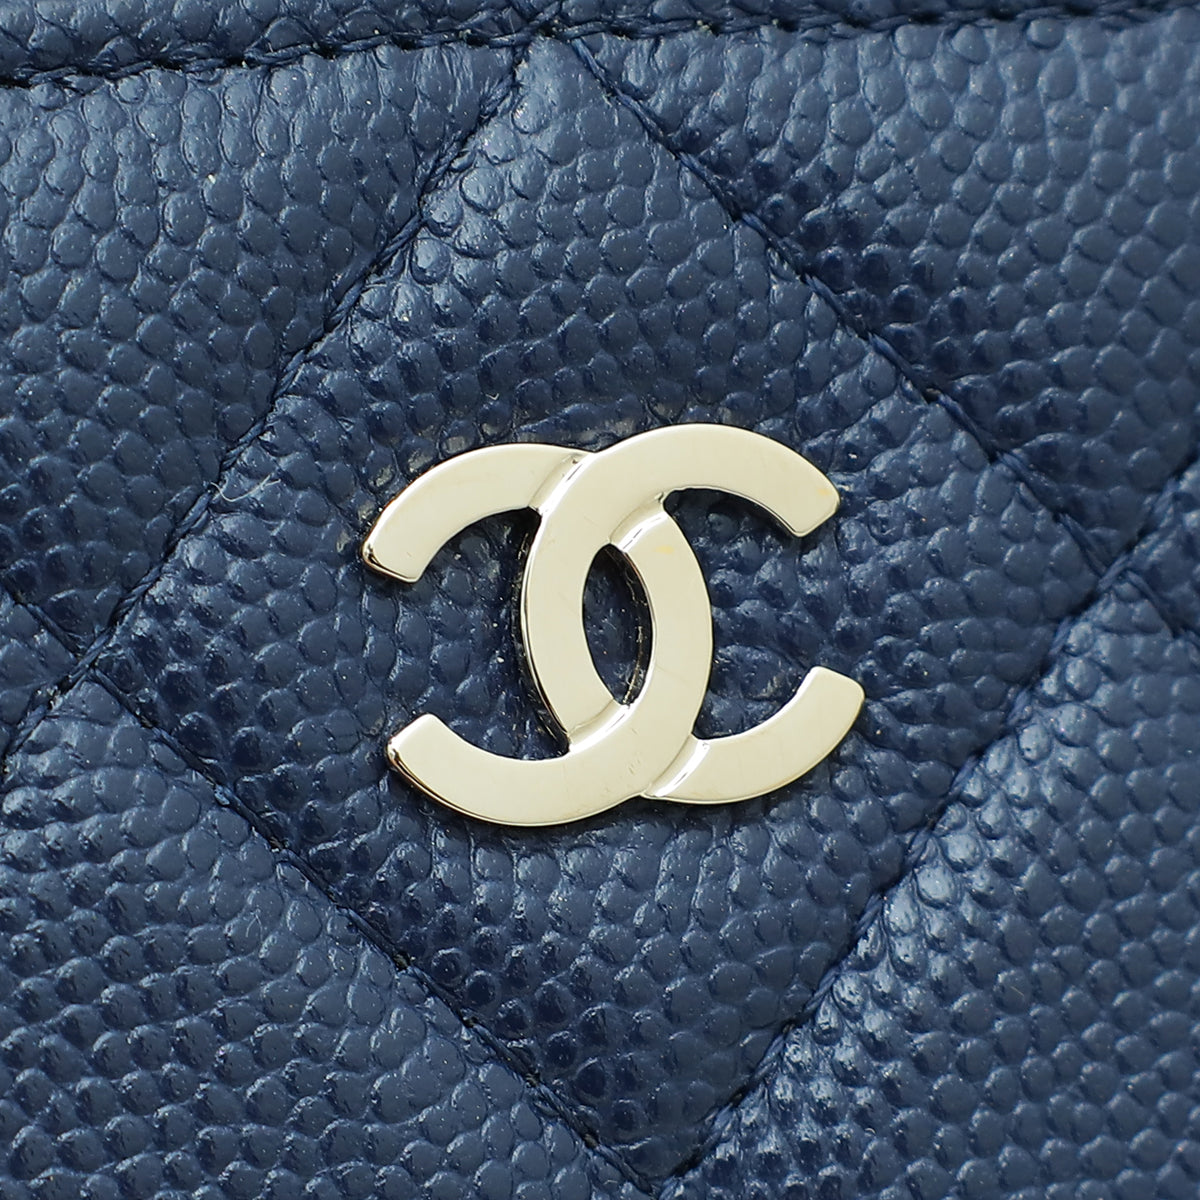 Chanel Navy Blue CC Compact Phone Chain Pouch